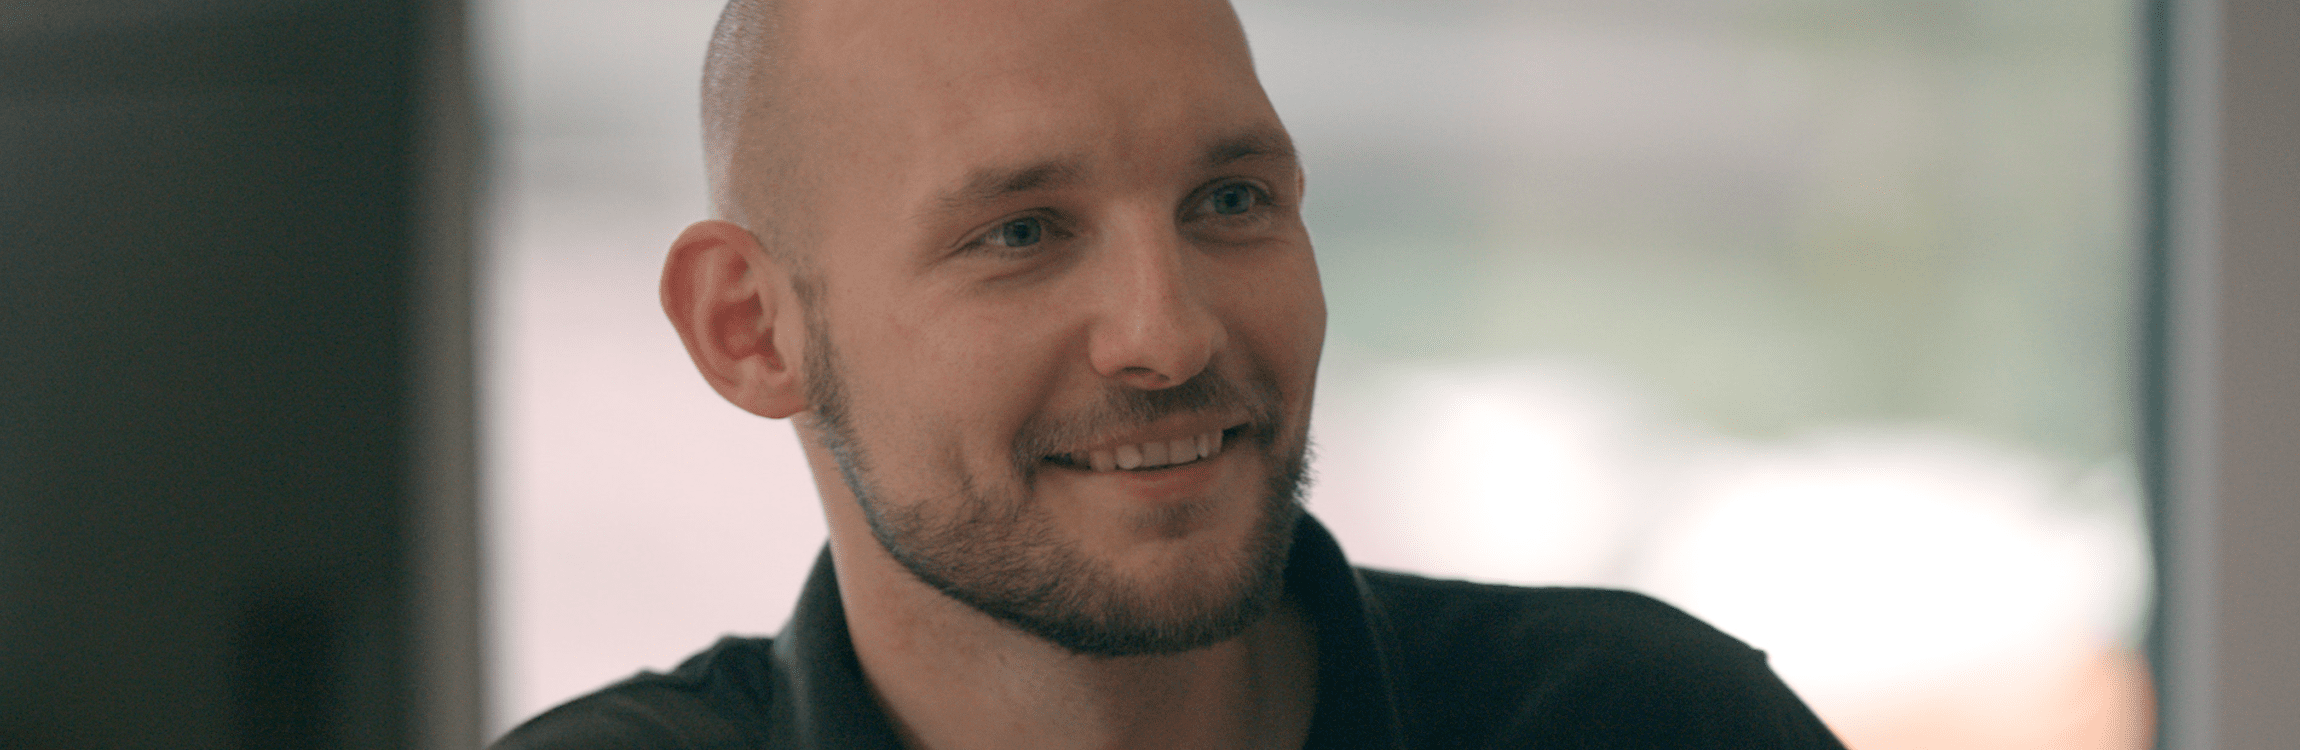 Growing Together - Florian Kaffl, Sales Project Manager bei TGW